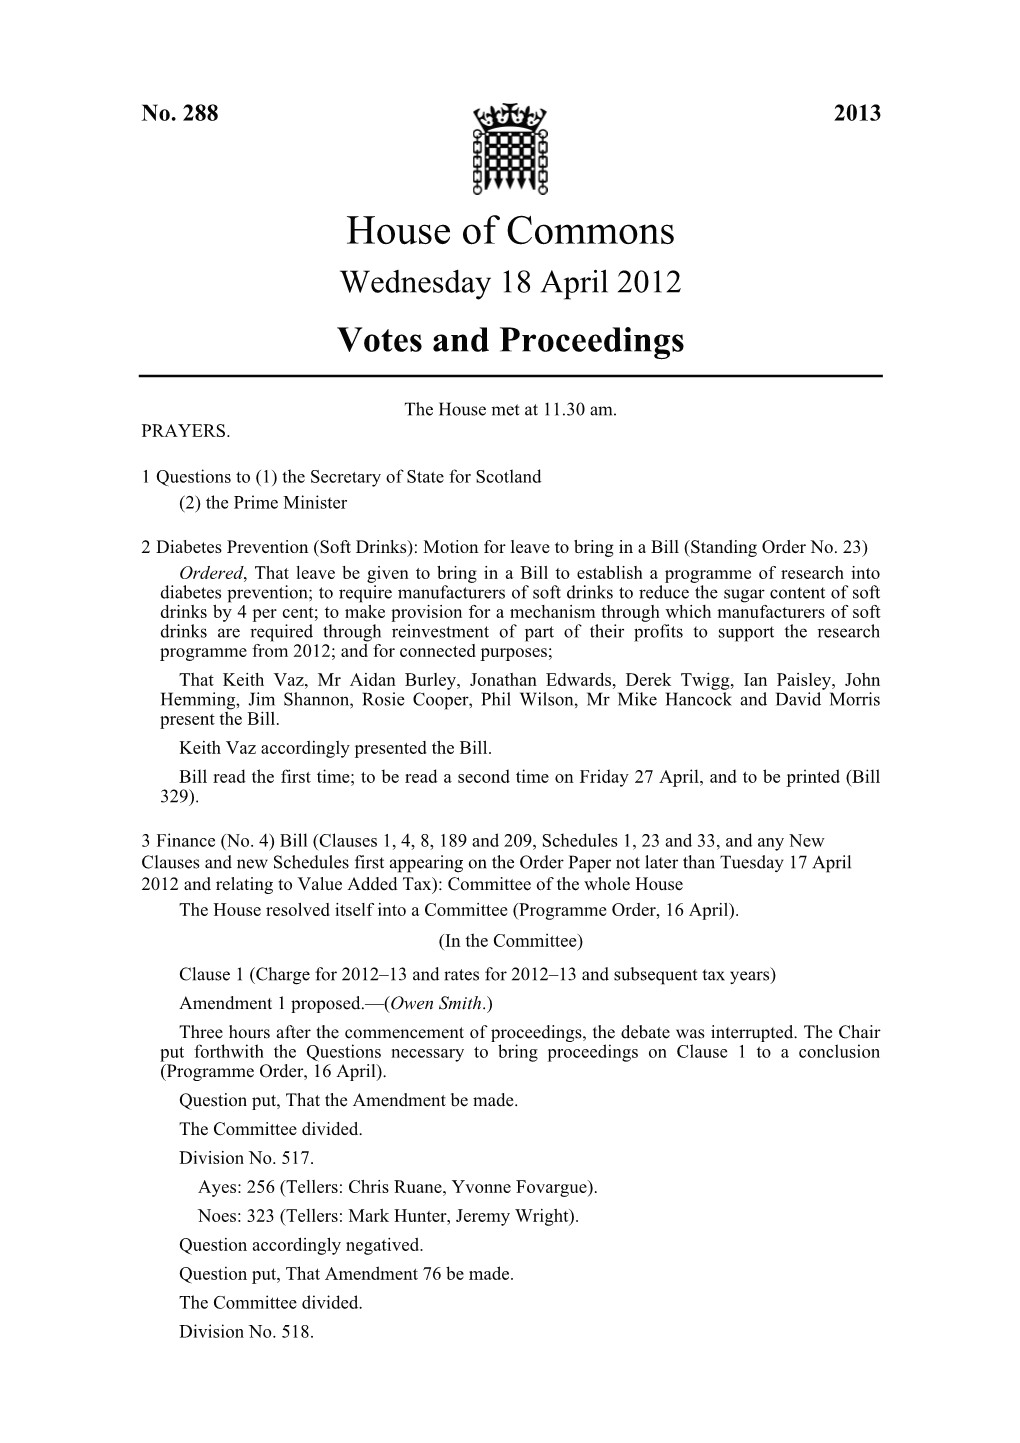 House of Commons Wednesday 18 April 2012 Votes and Proceedings